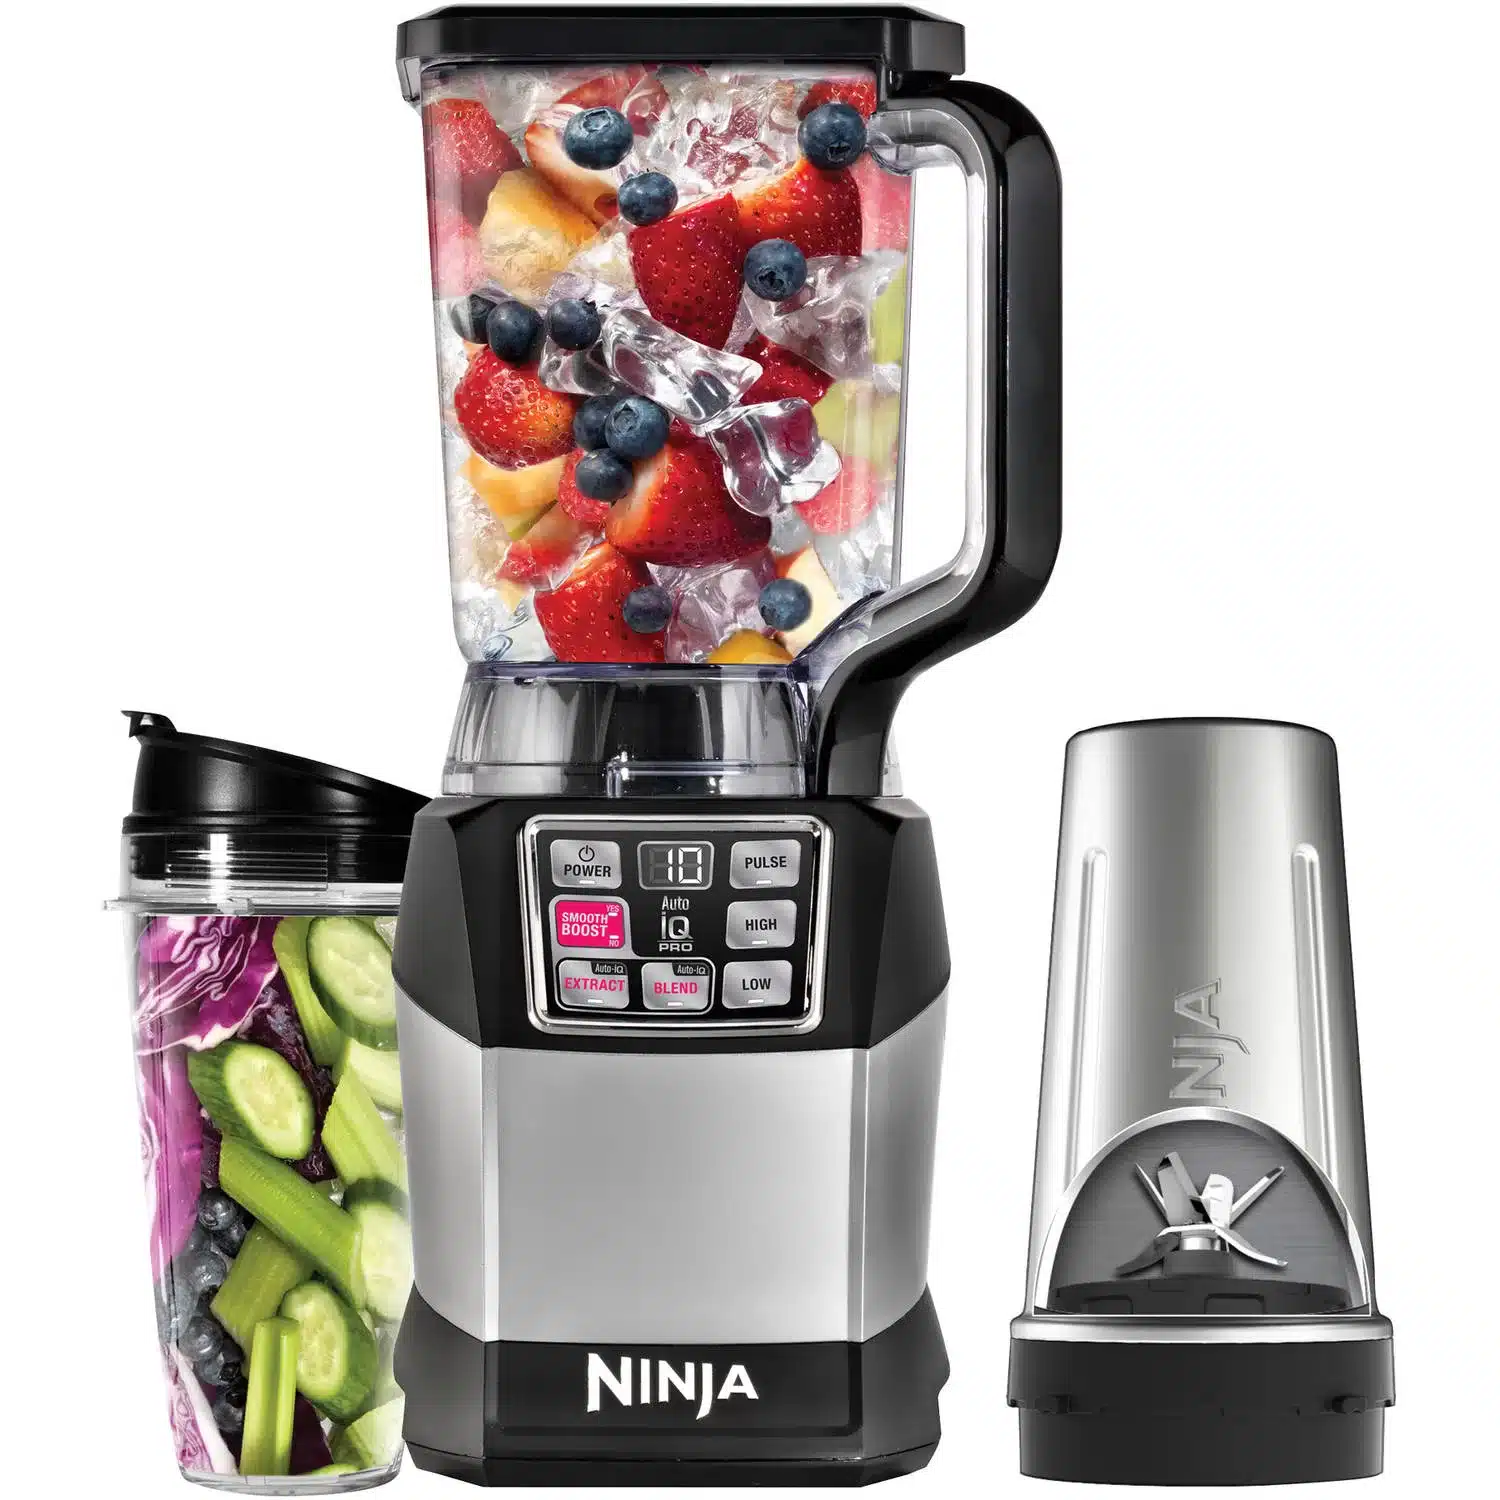 what-does-the-extract-button-do-on-the-ninja-blender